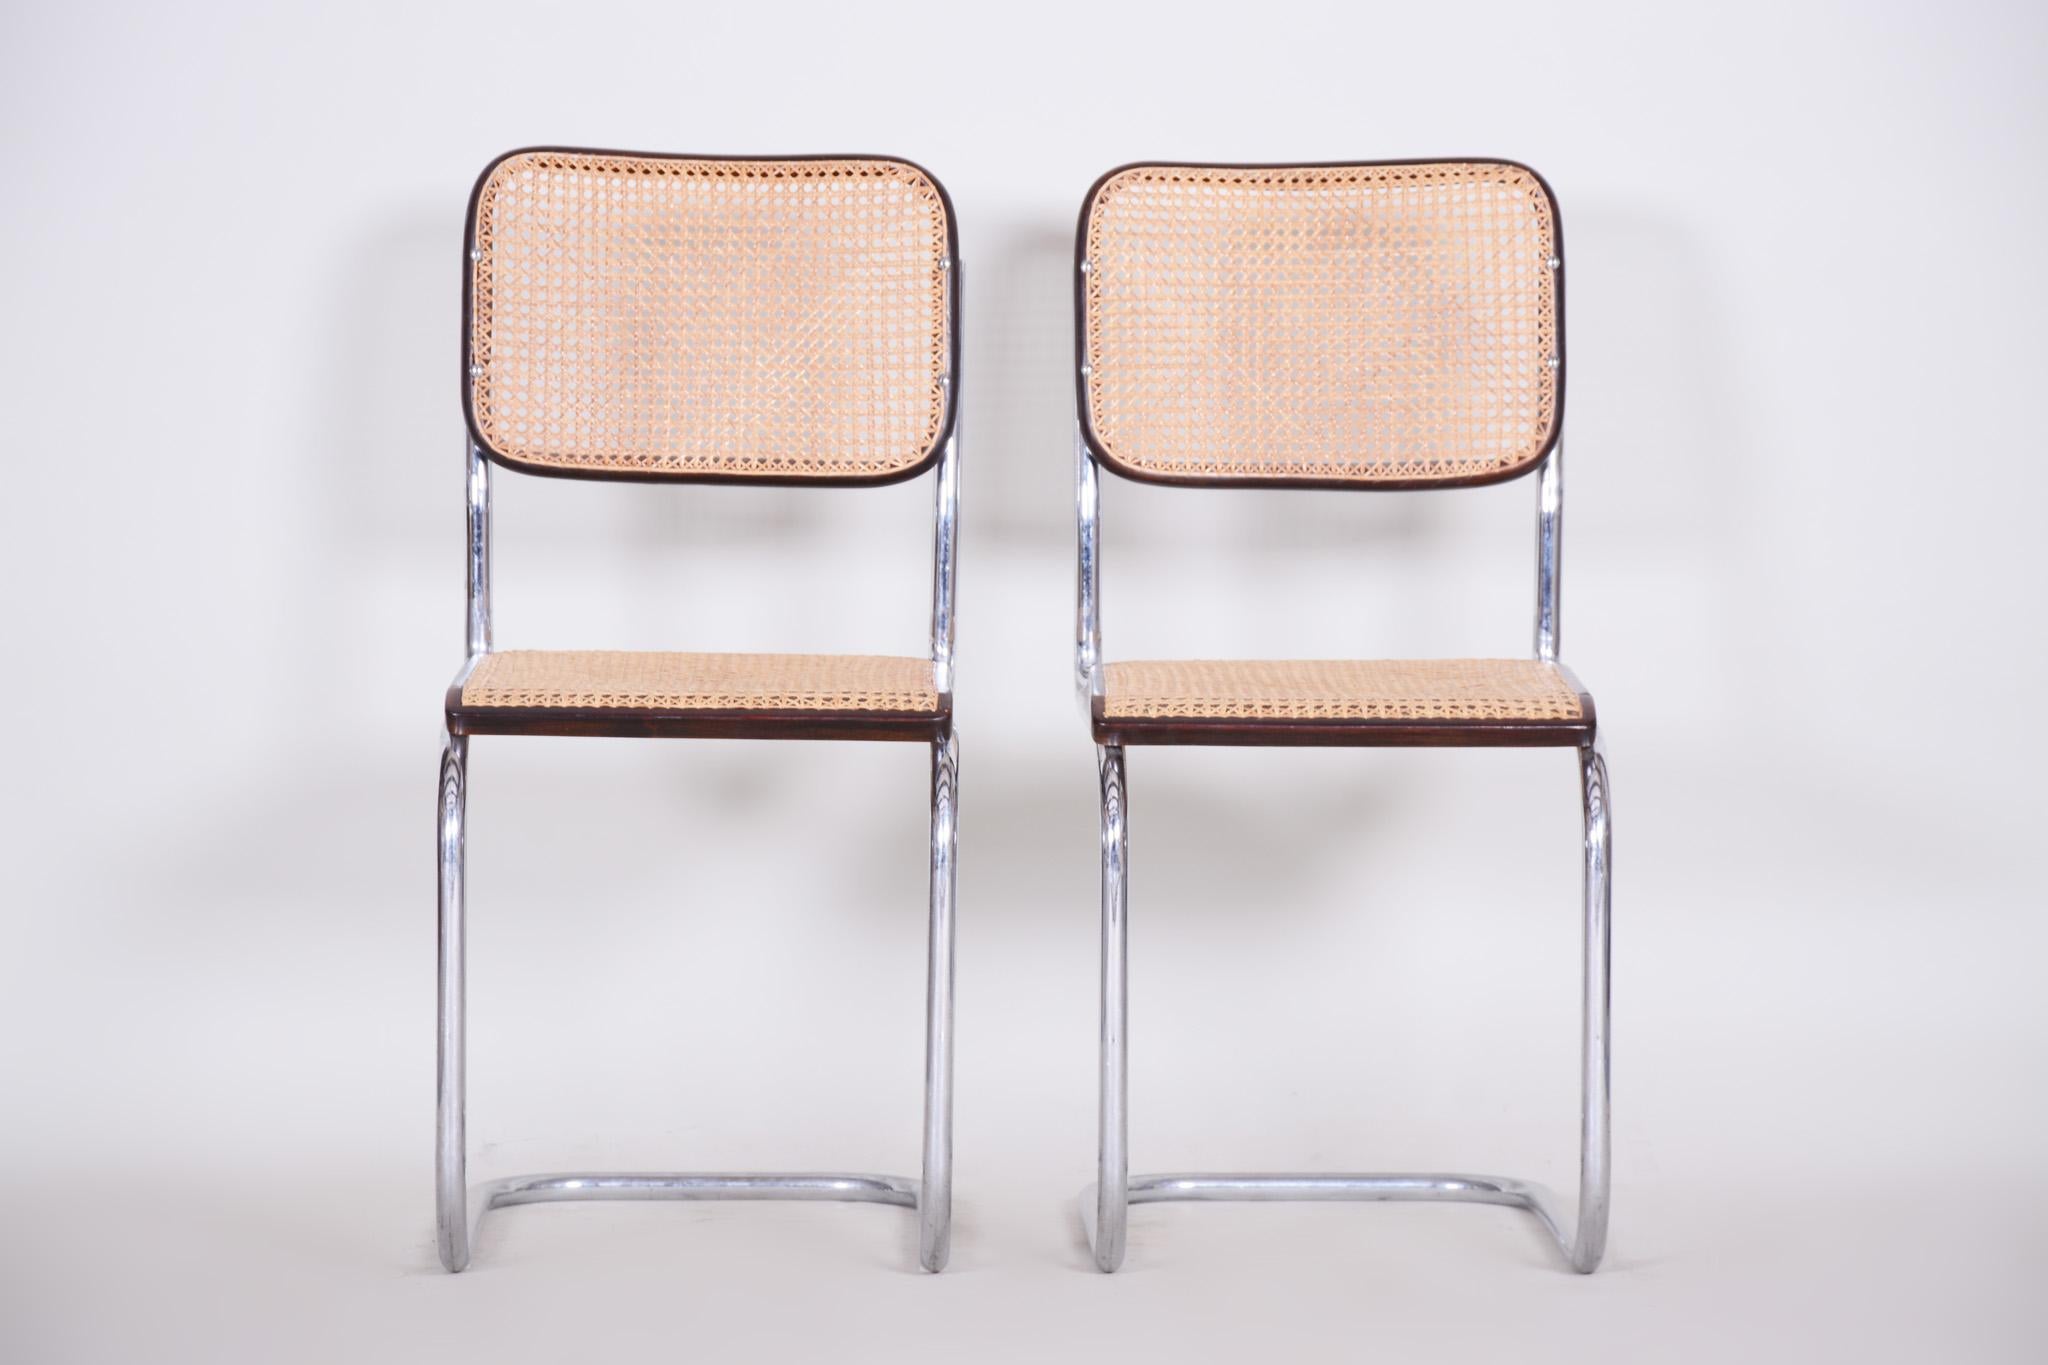 This original Bauhaus chairs designed by Marcel Breuer are a perfect representation of the simplistic elegance of the Bauhaus Era.

This is a perfect example of German Bauhaus style.
Original very well preserved condition.

Period: